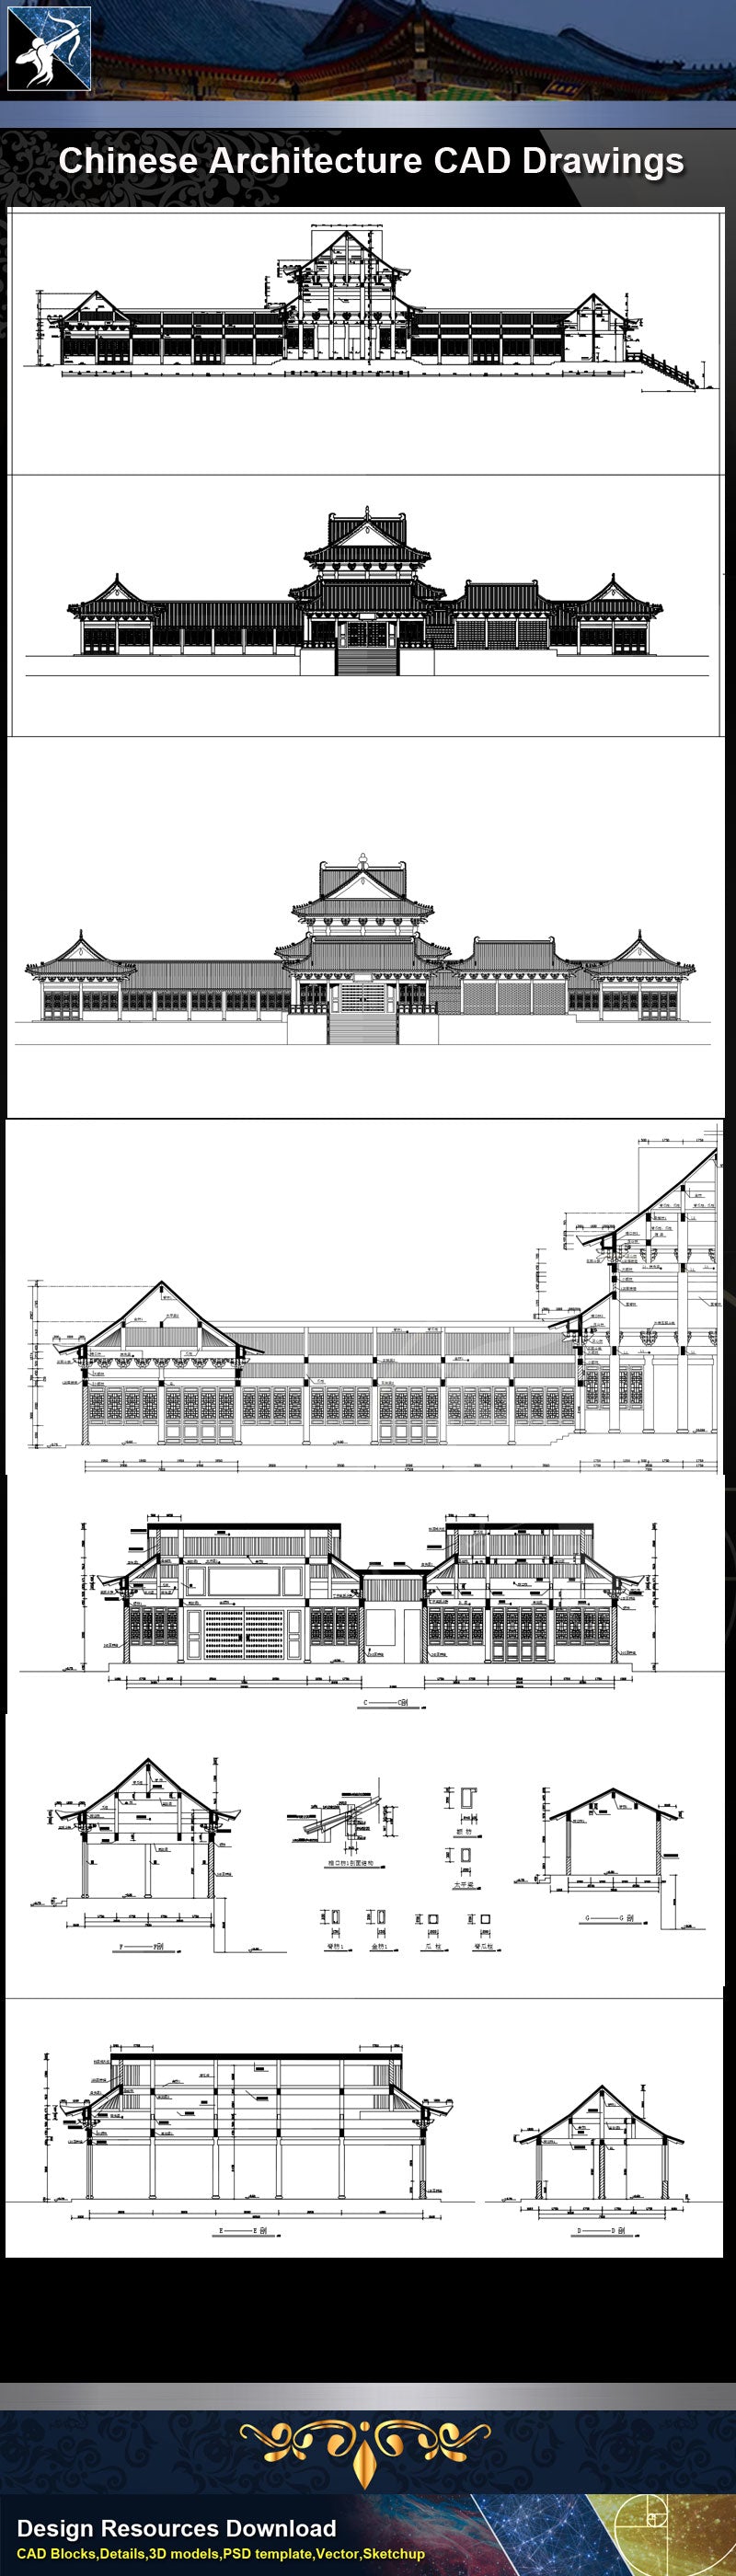 ★Chinese Architecture CAD Drawings-Chinese Temple